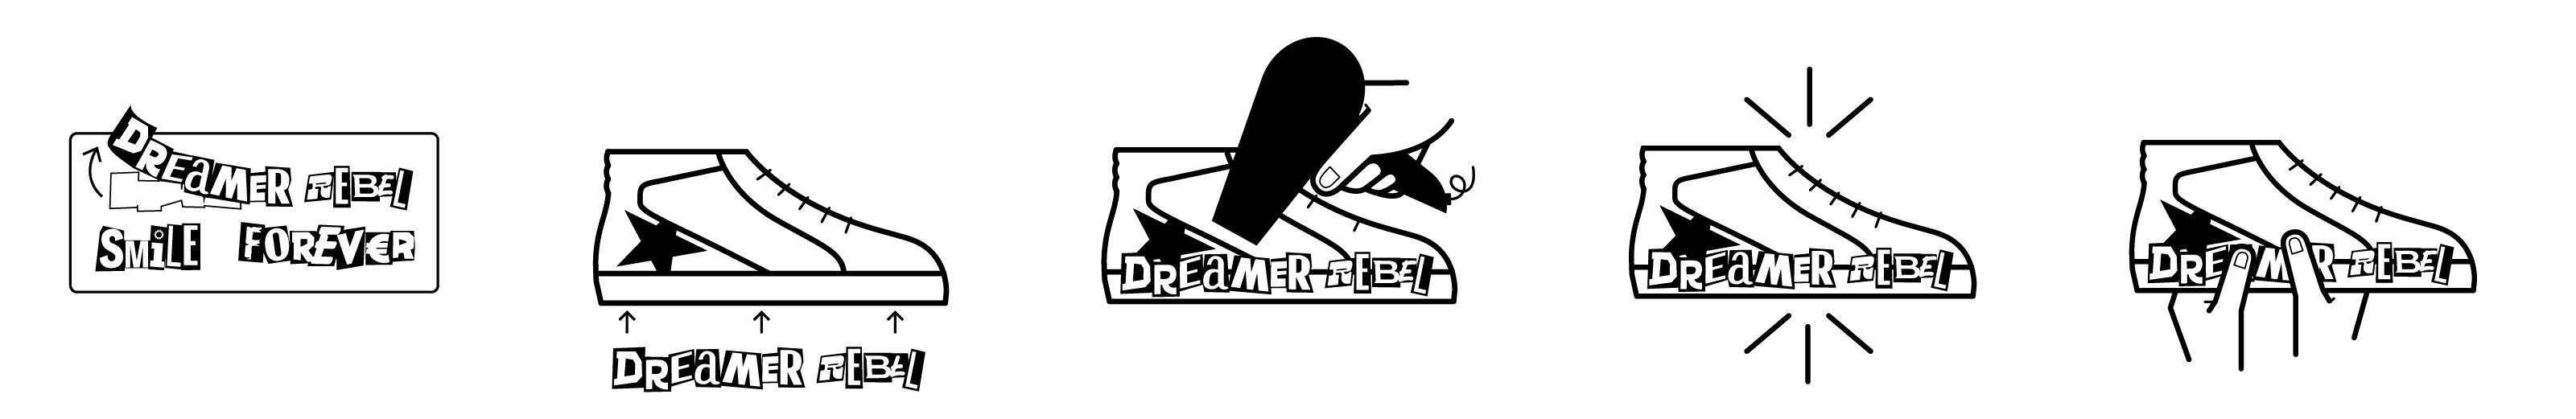 Dream Maker Collection: sweatshirts to customize and sneakers with patches